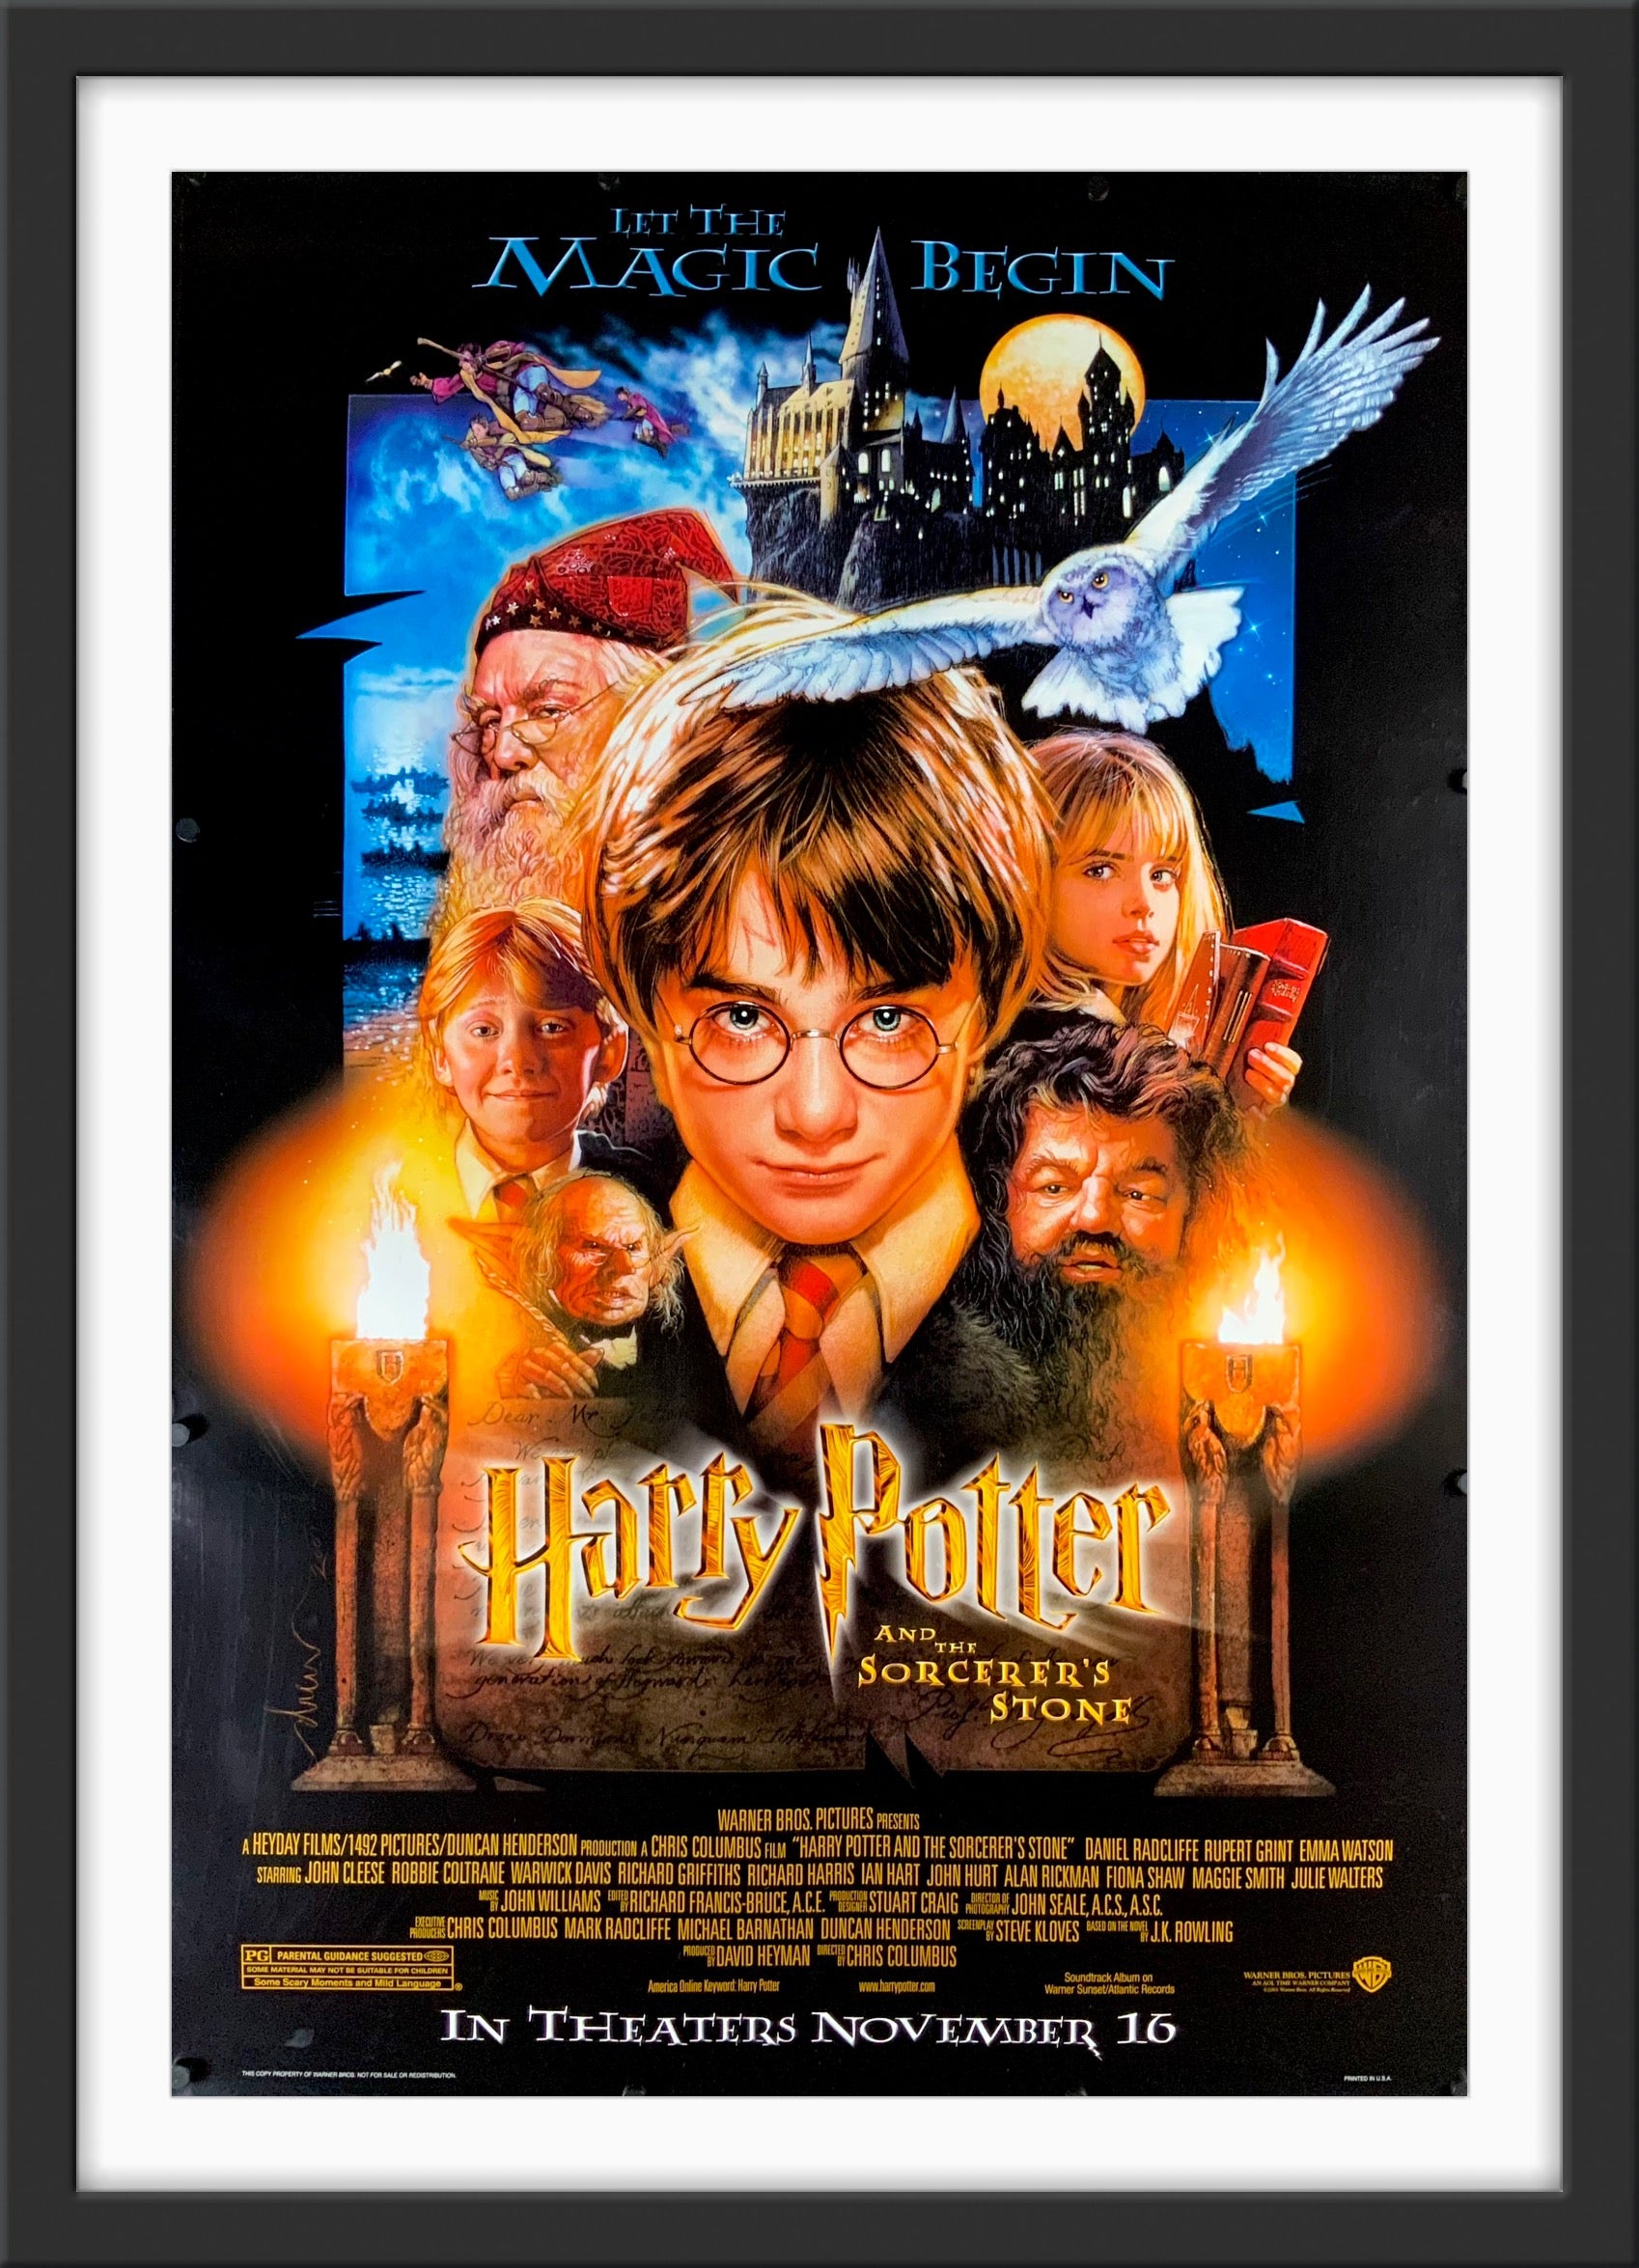 Harry Potter and the Philosophers Stone-2001-Original Movie Poster-AotM –  Art of the Movies